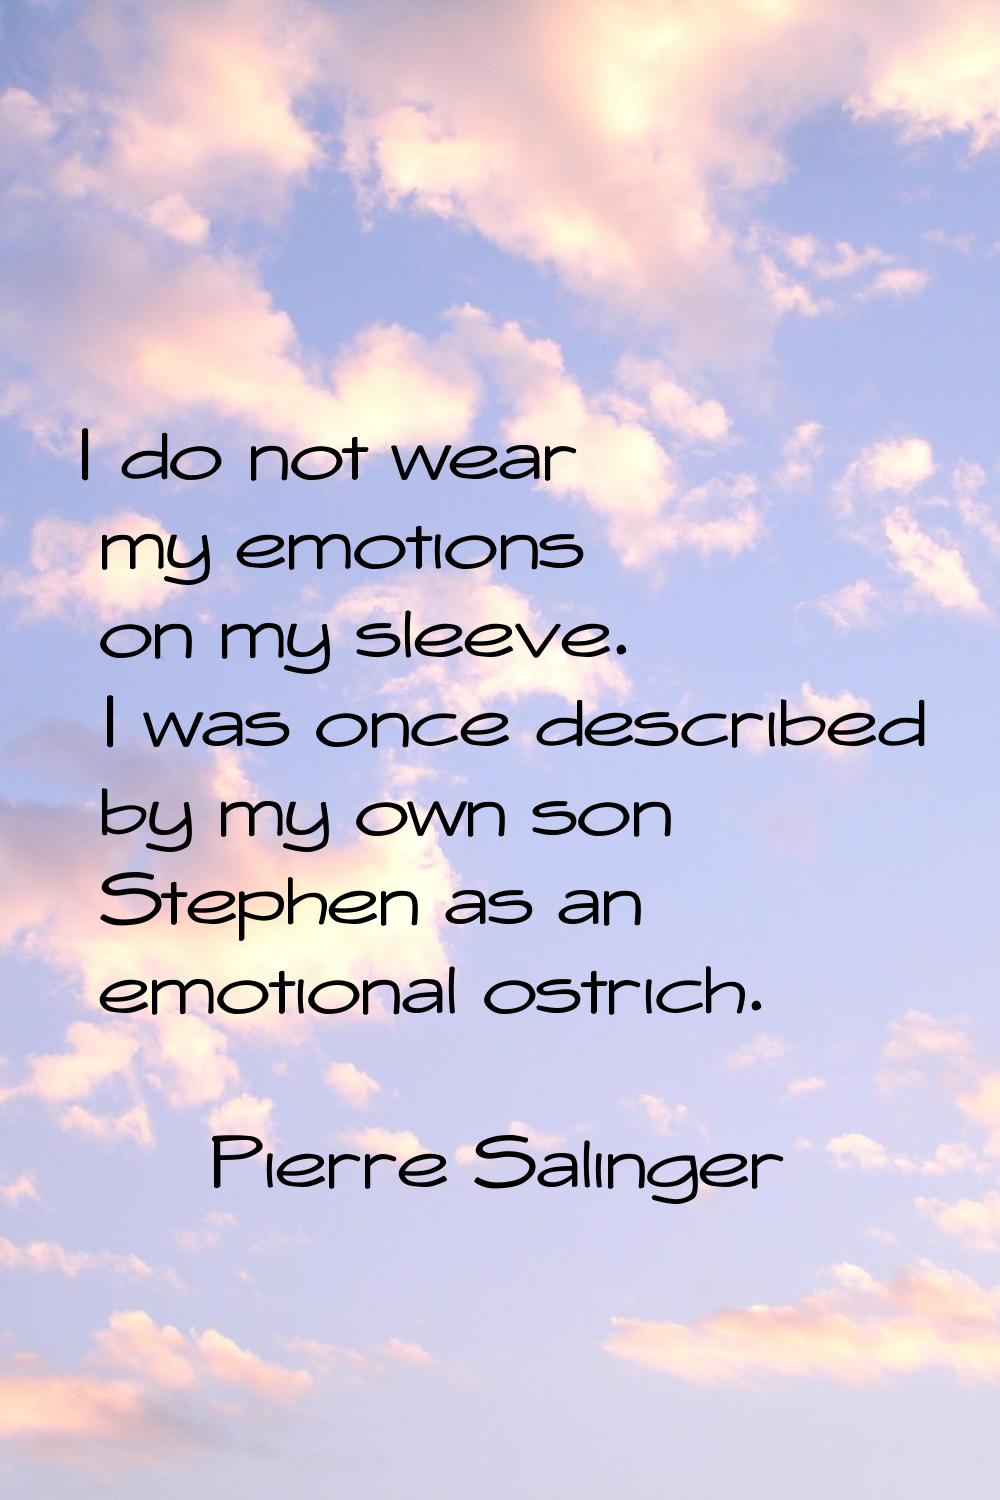 I do not wear my emotions on my sleeve. I was once described by my own son Stephen as an emotional 